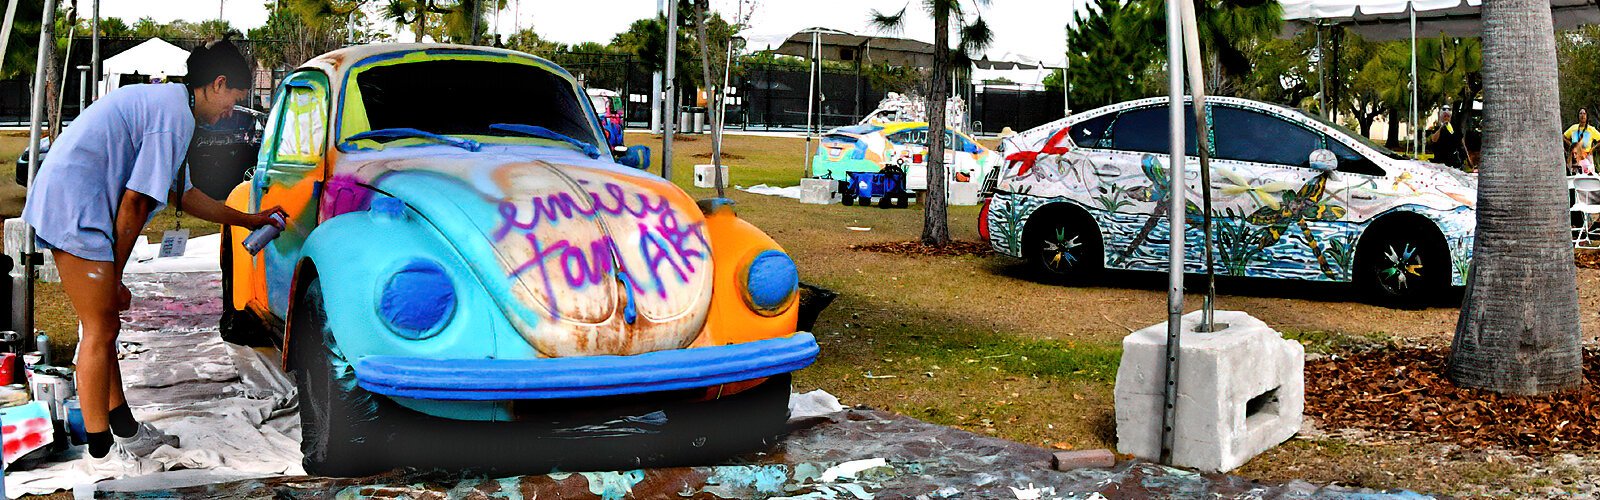 Local artist Emily Tan spray paints a customer’s car for the GFA Carmada Art Car Extravaganza during which several vehicles will be transformed into mobile works of art. 